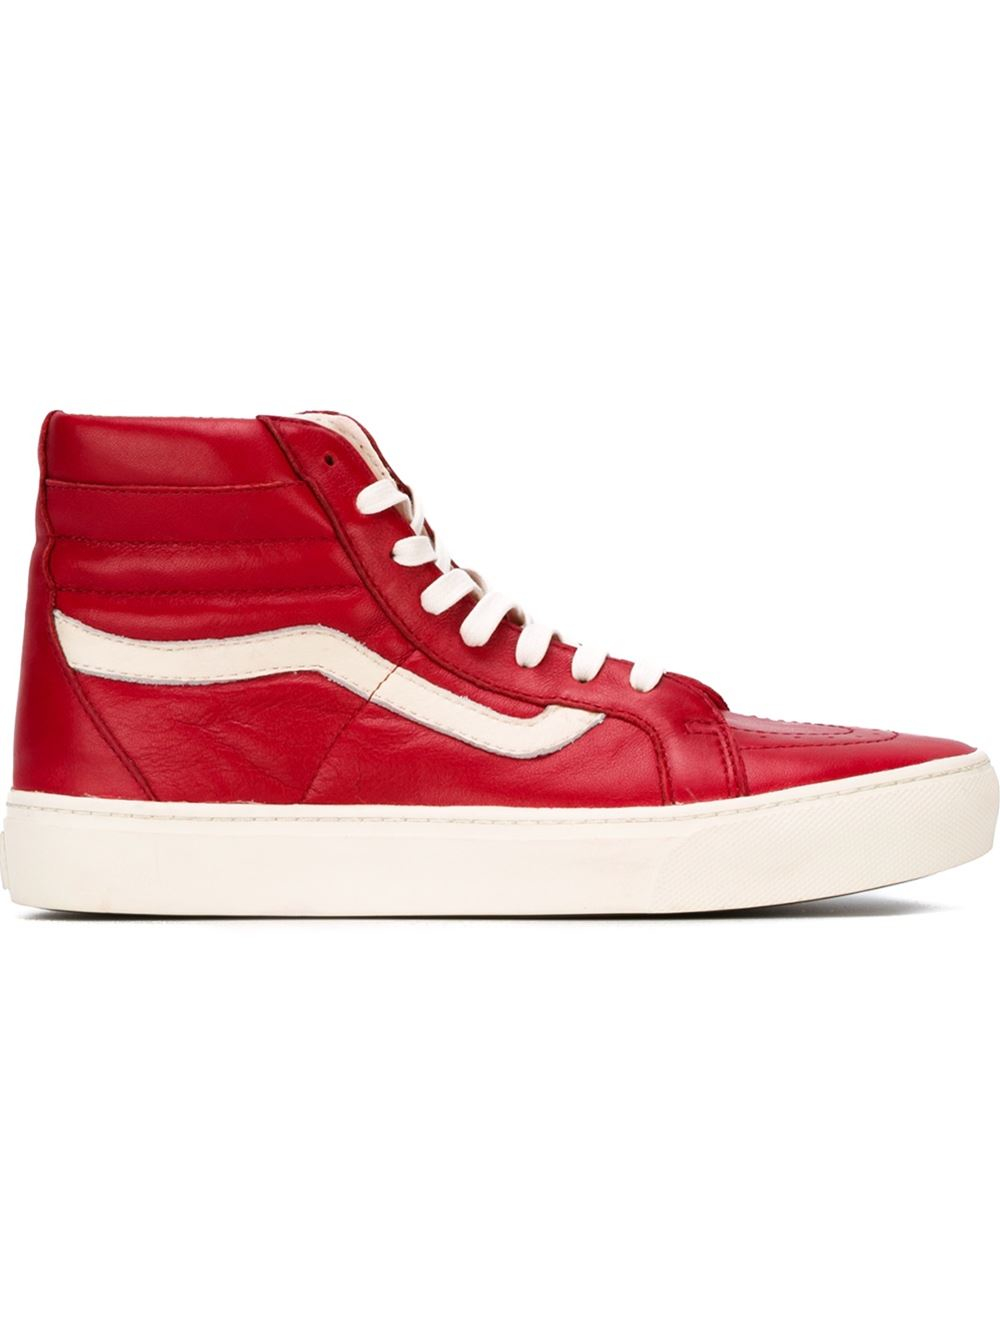 Vans Quilted-Leather High-Top Sneakers in Red for Men | Lyst